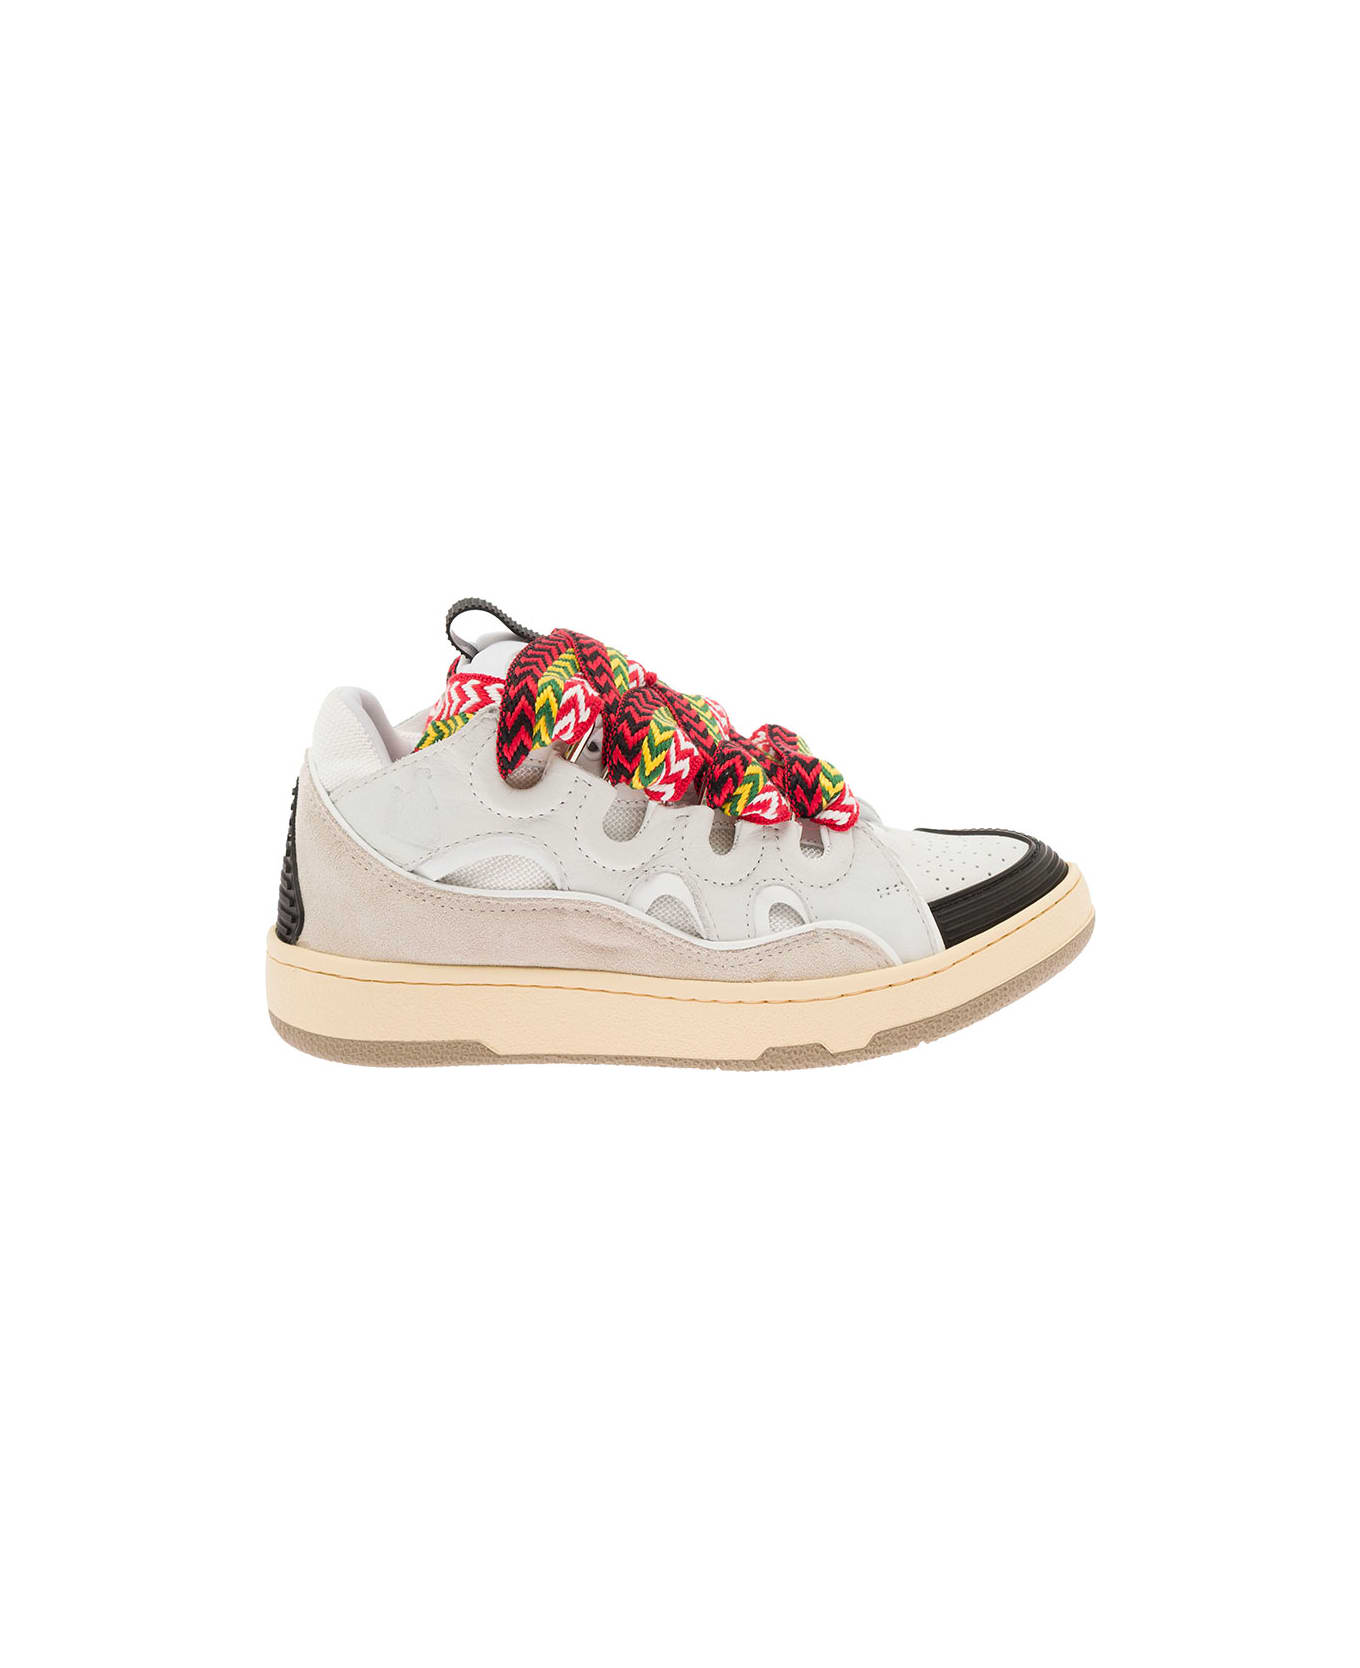 Lanvin Curb Leather Sneakers With Multicolor Laces Lanvin Woman - White